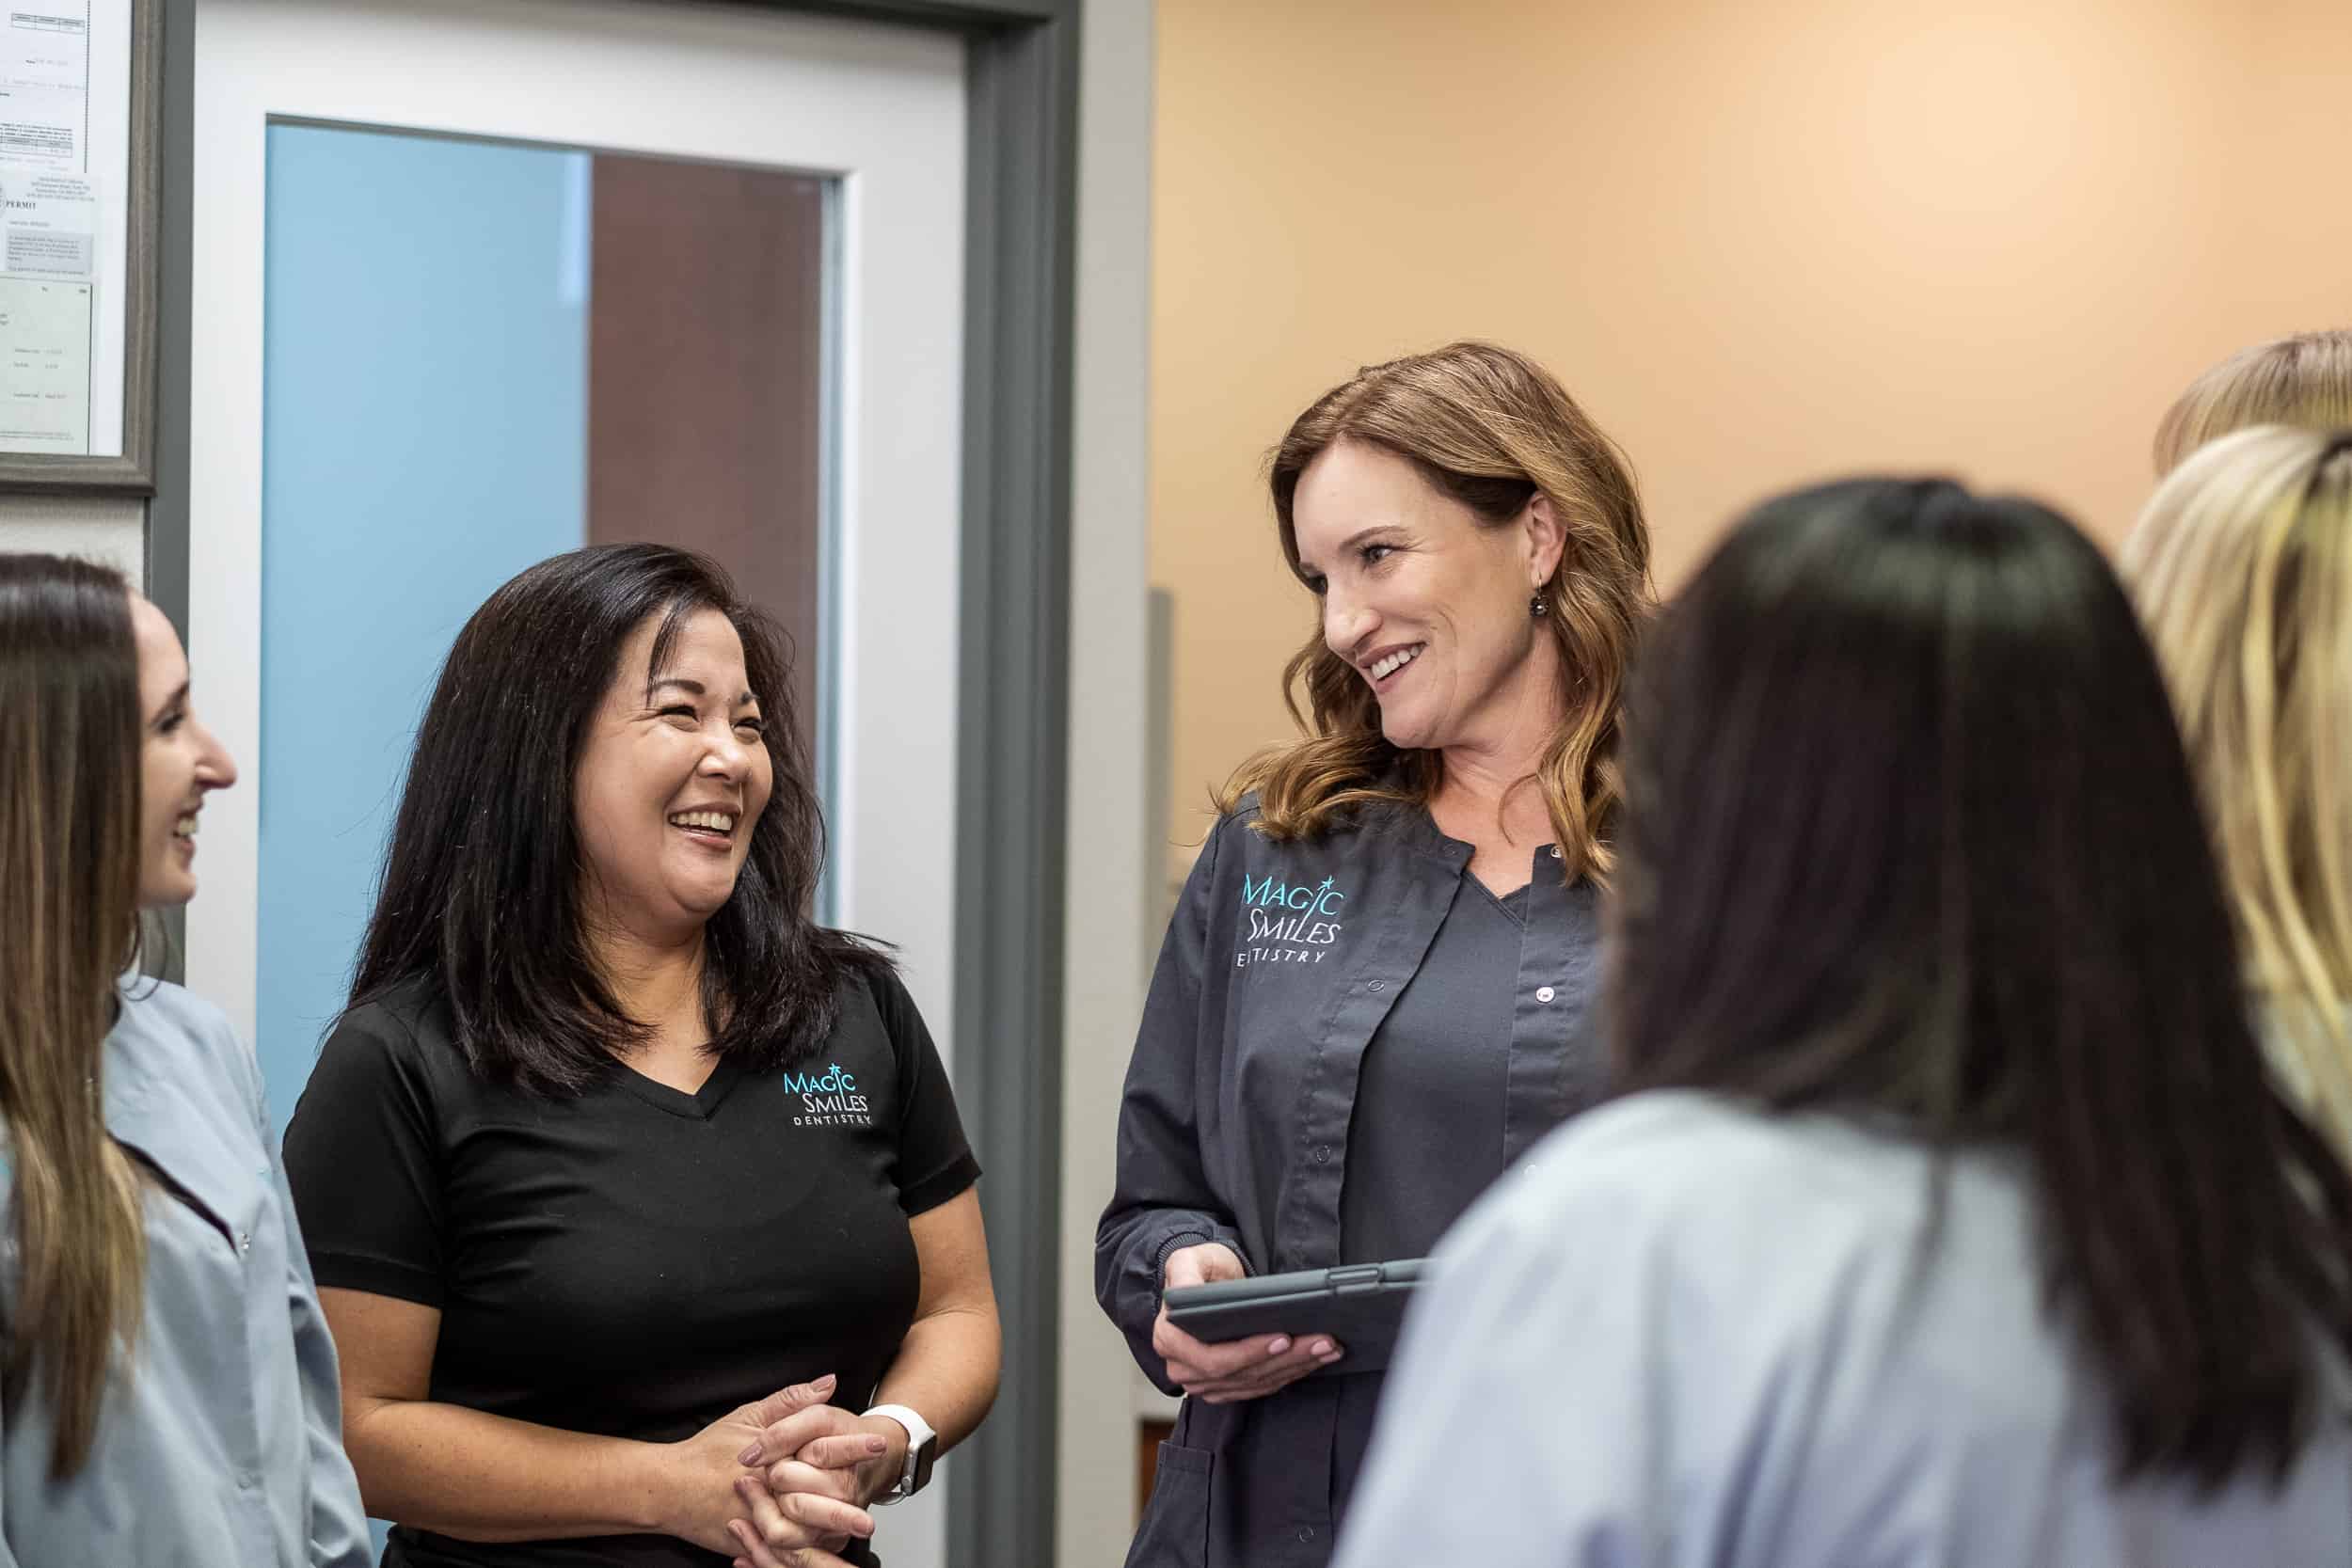 Staff Magic Smiles Dentistry 2019 El Dorado Hills California Dentist 20 - A Picture Is Worth a Thousand Words!